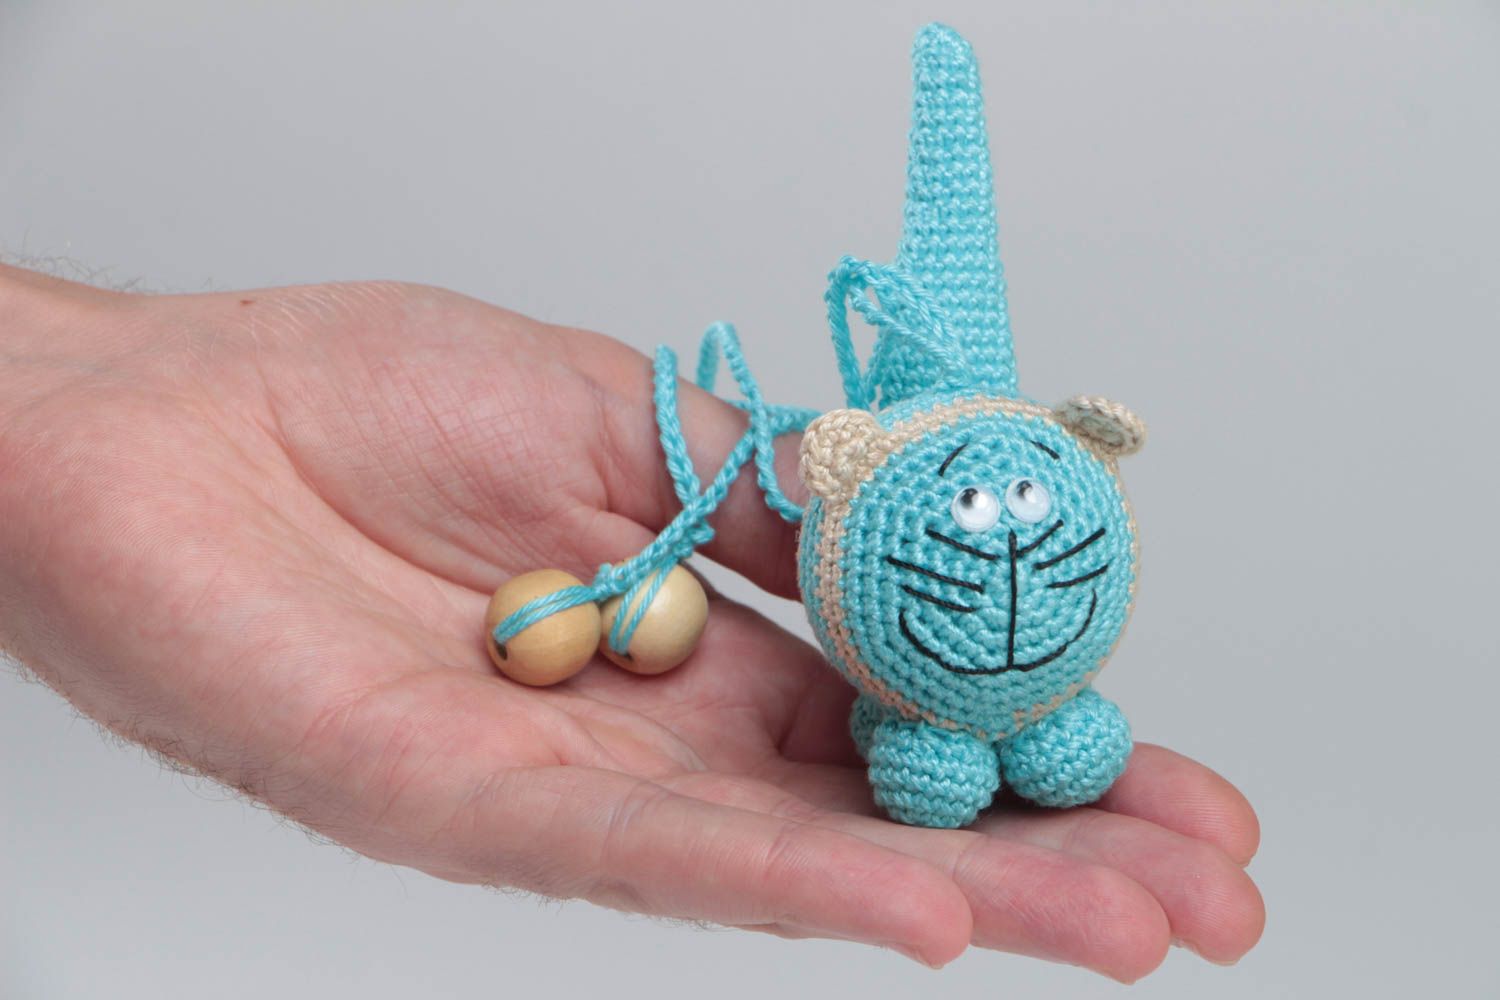 Crocheted cotton rattle small blue cat handmade toy for little children photo 5